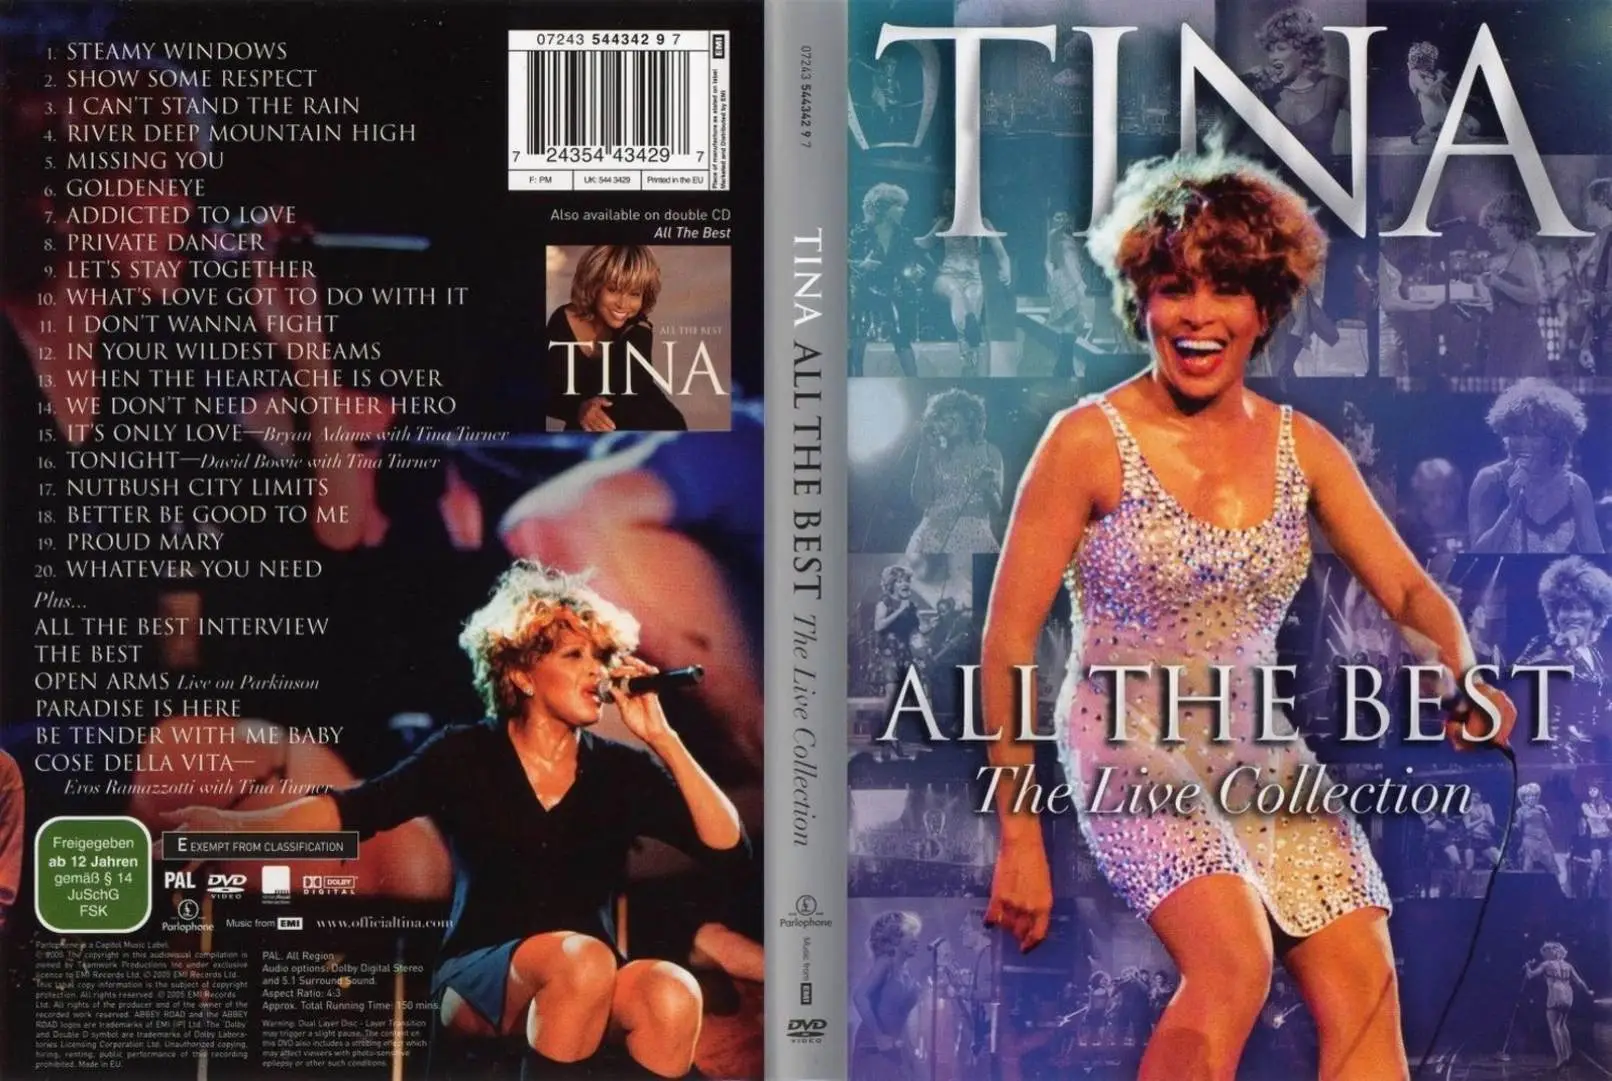 Collection 2005. Tina Turner the best Live in Barcelona, 1990.